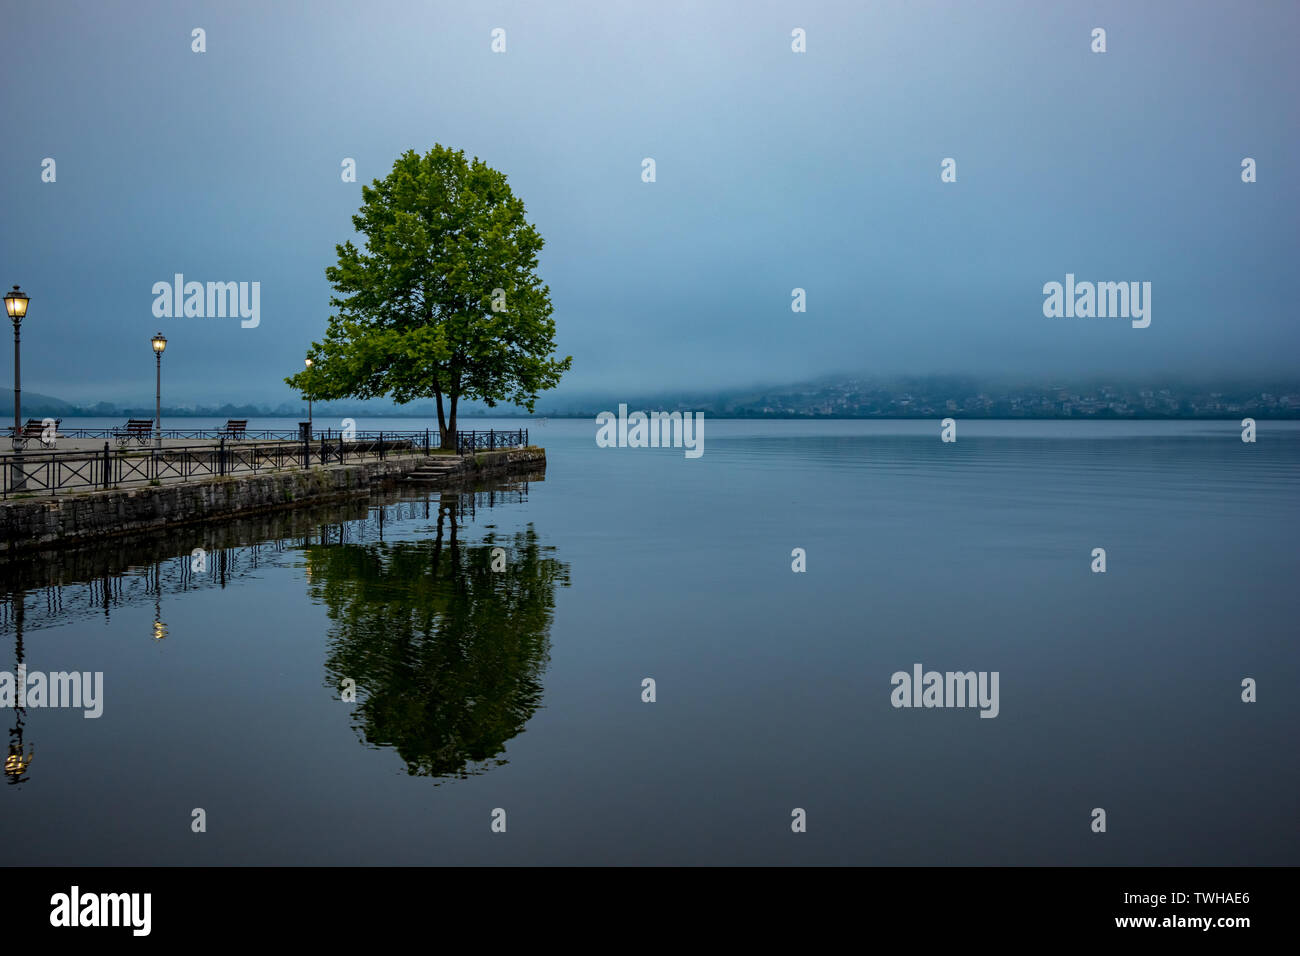 Ioannina, Greece, lake misty early spring morning with fog over the lake Pamvotida calm waters. Tree reflection, high contrast mystical picture Stock Photo